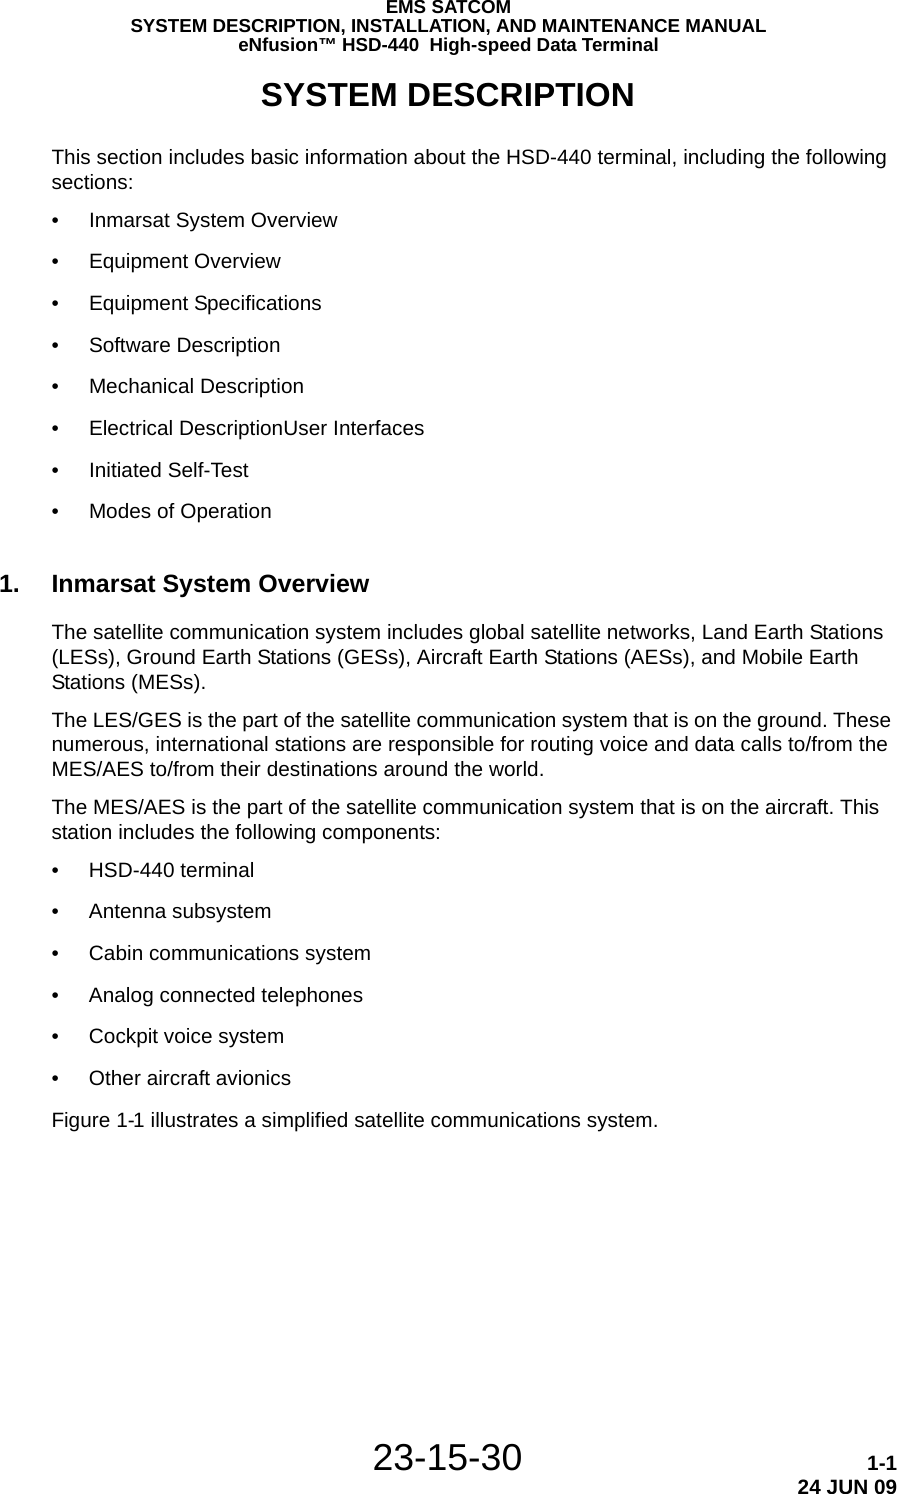 EMS SATCOMSYSTEM DESCRIPTION, INSTALLATION, AND MAINTENANCE MANUALeNfusion™ HSD-440  High-speed Data Terminal23-15-30 1-124 JUN 09SYSTEM DESCRIPTIONThis section includes basic information about the HSD-440 terminal, including the following sections:•Inmarsat System Overview•Equipment Overview•Equipment Specifications•Software Description•Mechanical Description•Electrical DescriptionUser Interfaces•Initiated Self-Test•Modes of Operation1. Inmarsat System OverviewThe satellite communication system includes global satellite networks, Land Earth Stations (LESs), Ground Earth Stations (GESs), Aircraft Earth Stations (AESs), and Mobile Earth Stations (MESs).The LES/GES is the part of the satellite communication system that is on the ground. These numerous, international stations are responsible for routing voice and data calls to/from the MES/AES to/from their destinations around the world. The MES/AES is the part of the satellite communication system that is on the aircraft. This station includes the following components:• HSD-440 terminal• Antenna subsystem• Cabin communications system• Analog connected telephones• Cockpit voice system• Other aircraft avionicsFigure 1-1 illustrates a simplified satellite communications system.